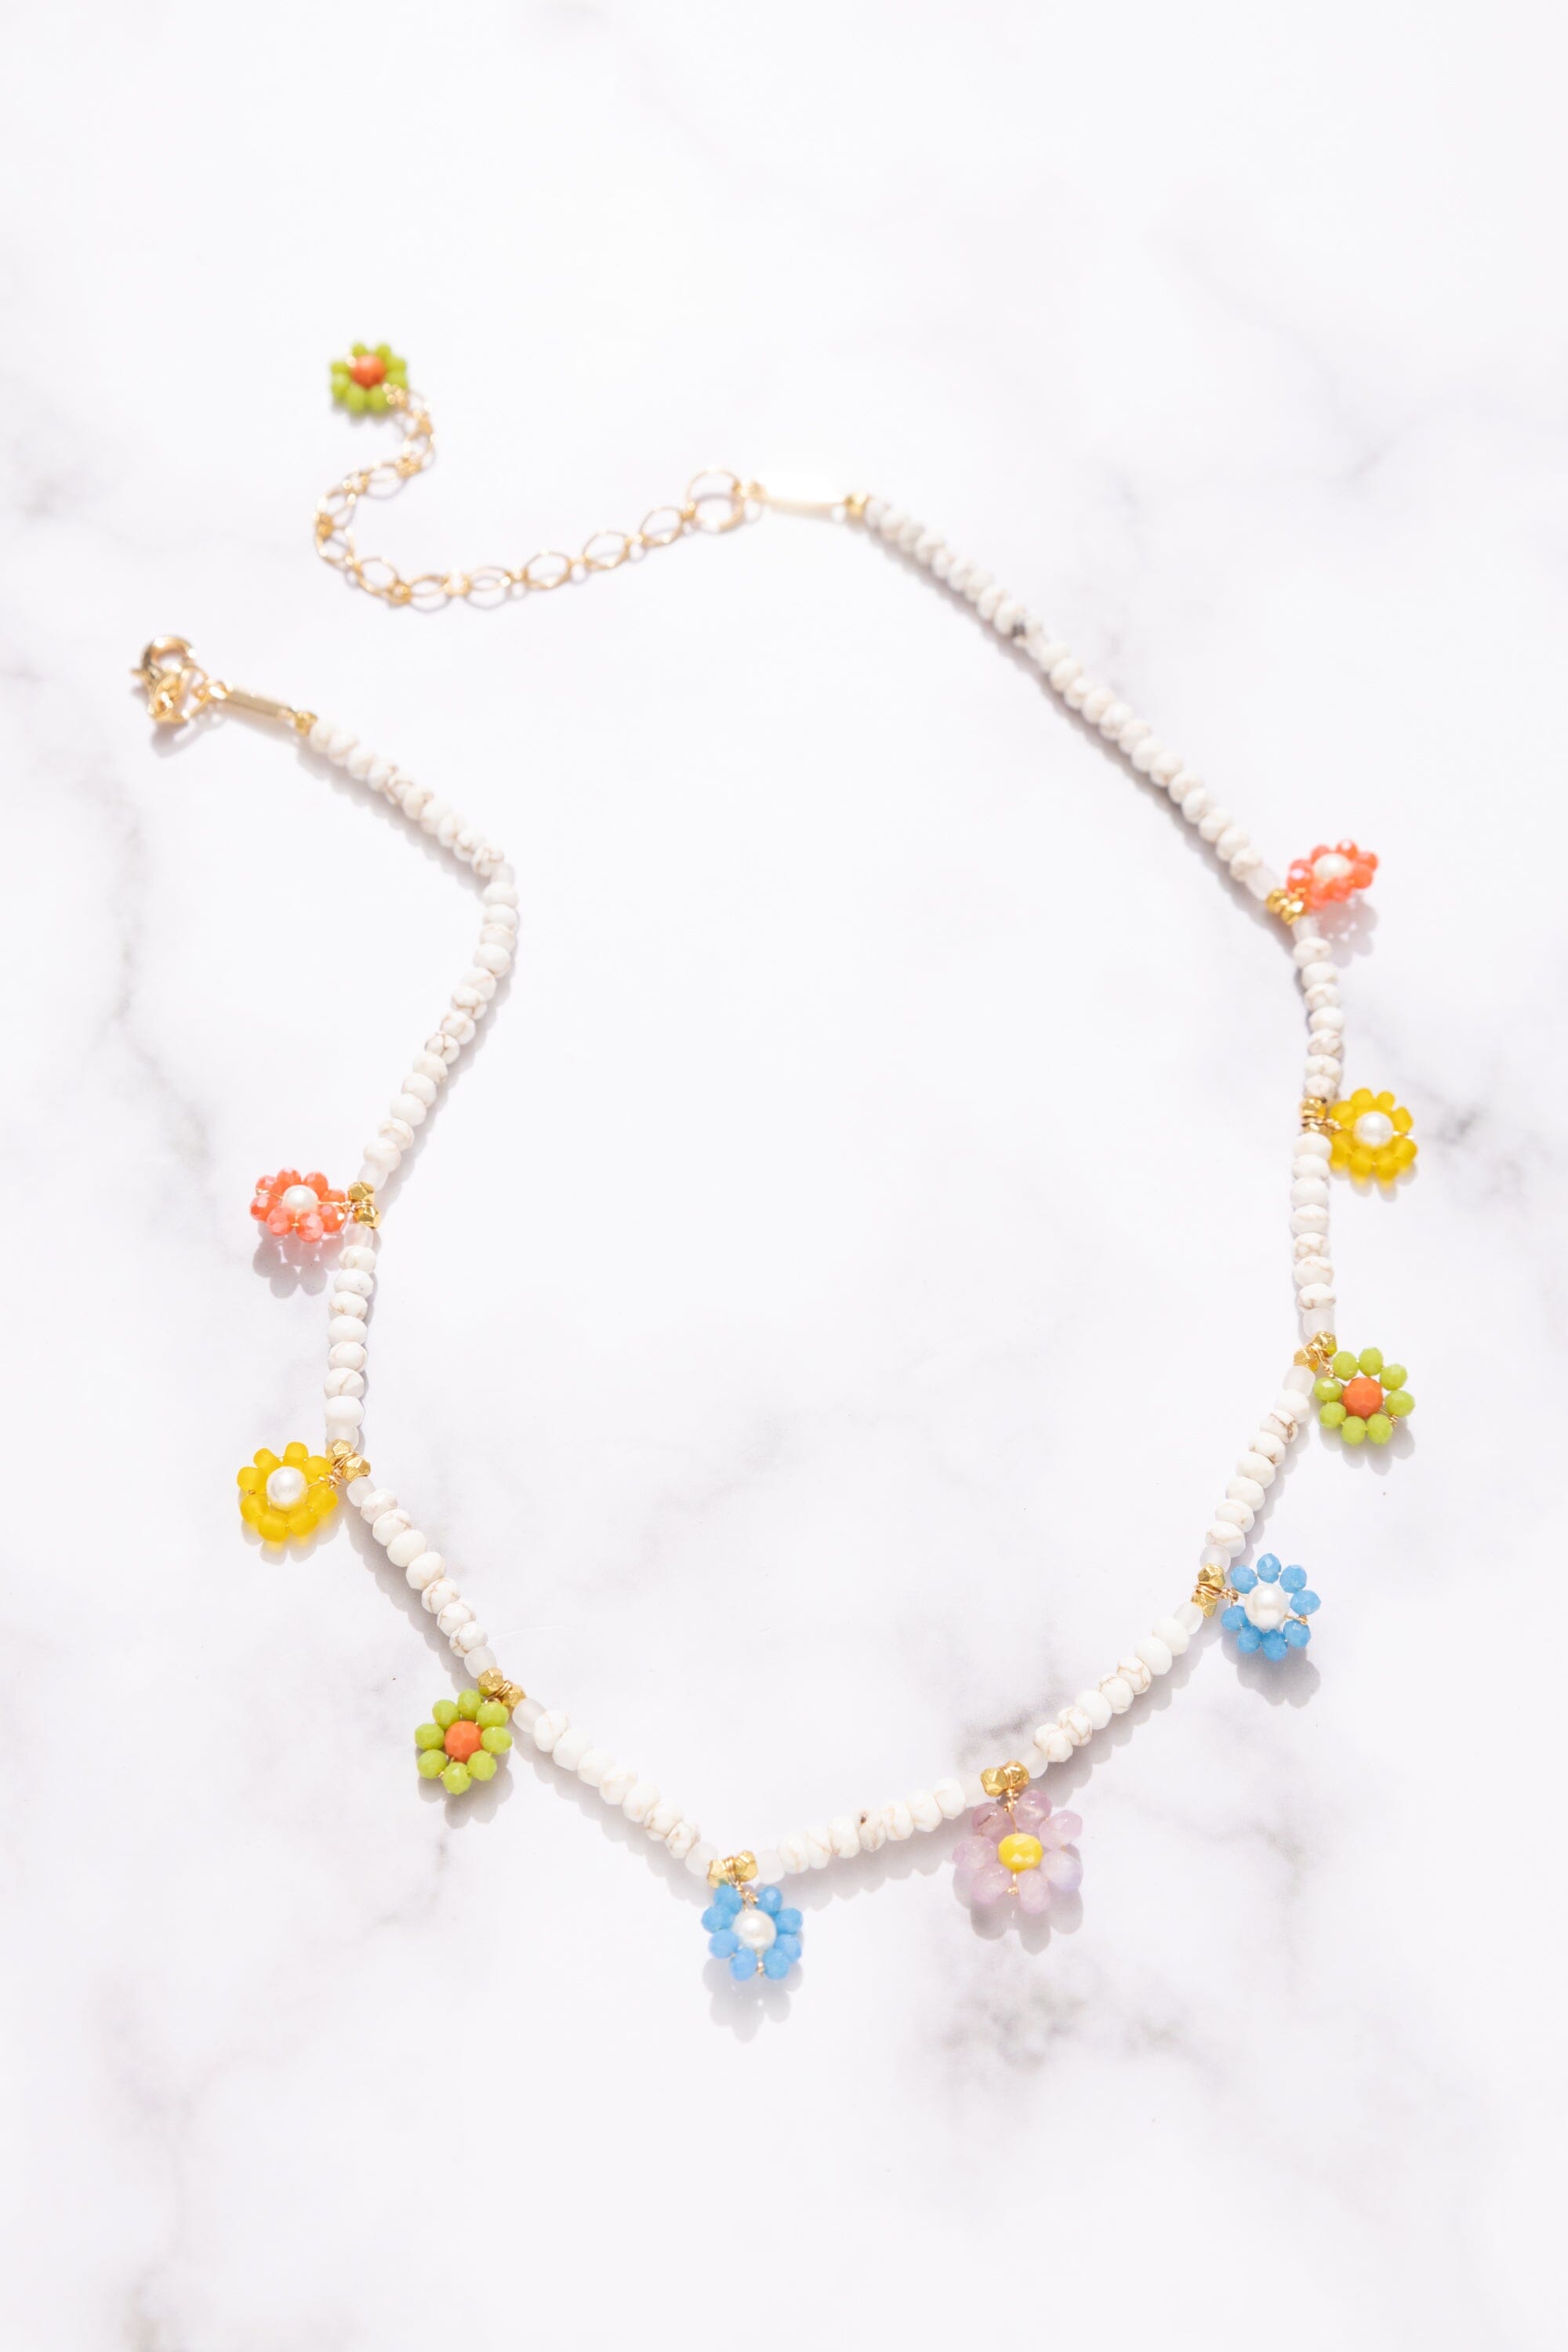 Cute Y2k Beaded Flower Daisy Necklace Smile Face Beads Pearl Jewellery  Gifts (Daisy blue) : Amazon.co.uk: Fashion